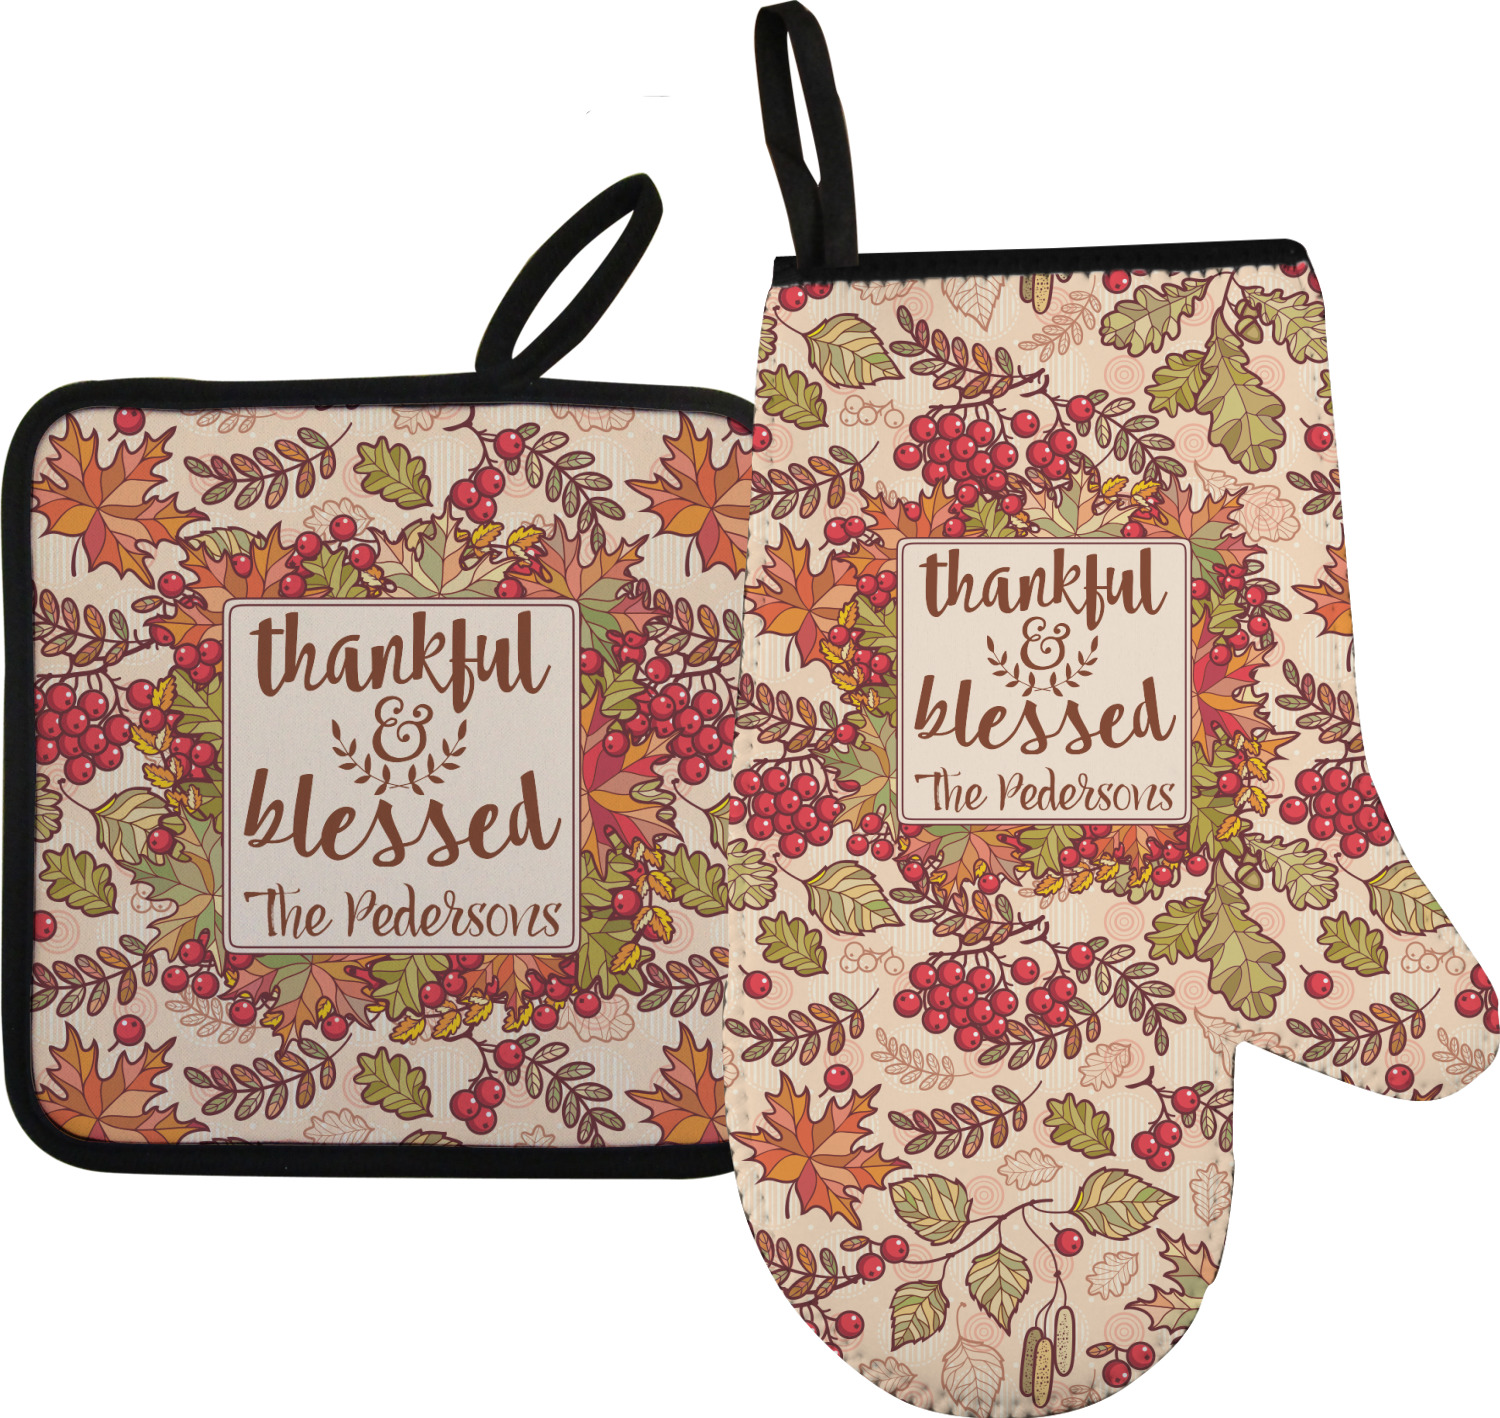 https://www.youcustomizeit.com/common/MAKE/1038351/Thanksgiving-Quotes-and-Sayings-Neoprene-Oven-Mitt-and-Pot-Holder-Set.jpg?lm=1571321771